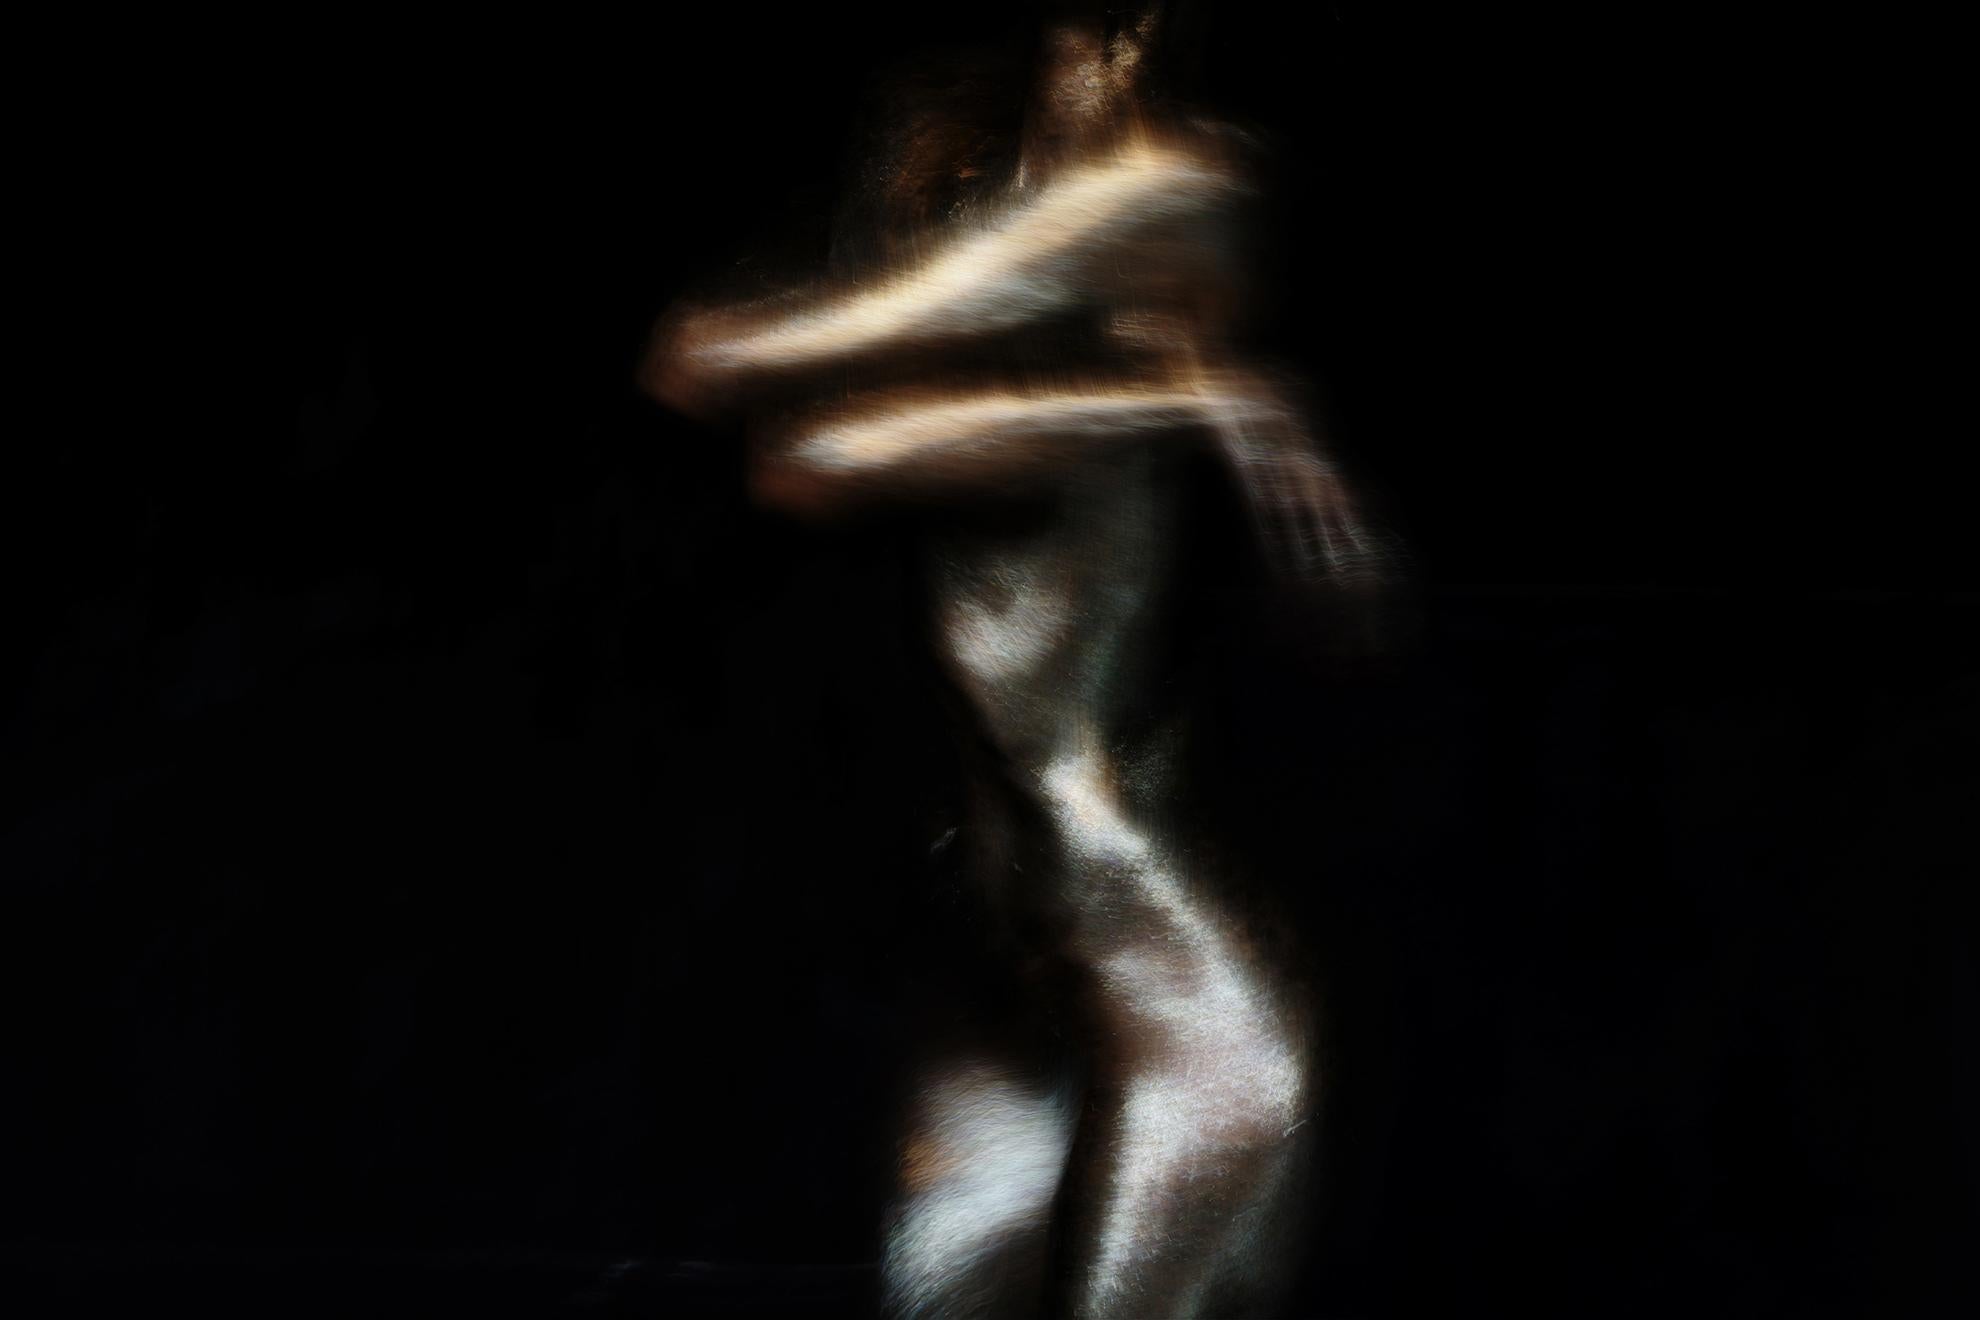 Roger Reist Abstract Photograph - Hope in My Embrace - Abstract Expressionist Art Photography